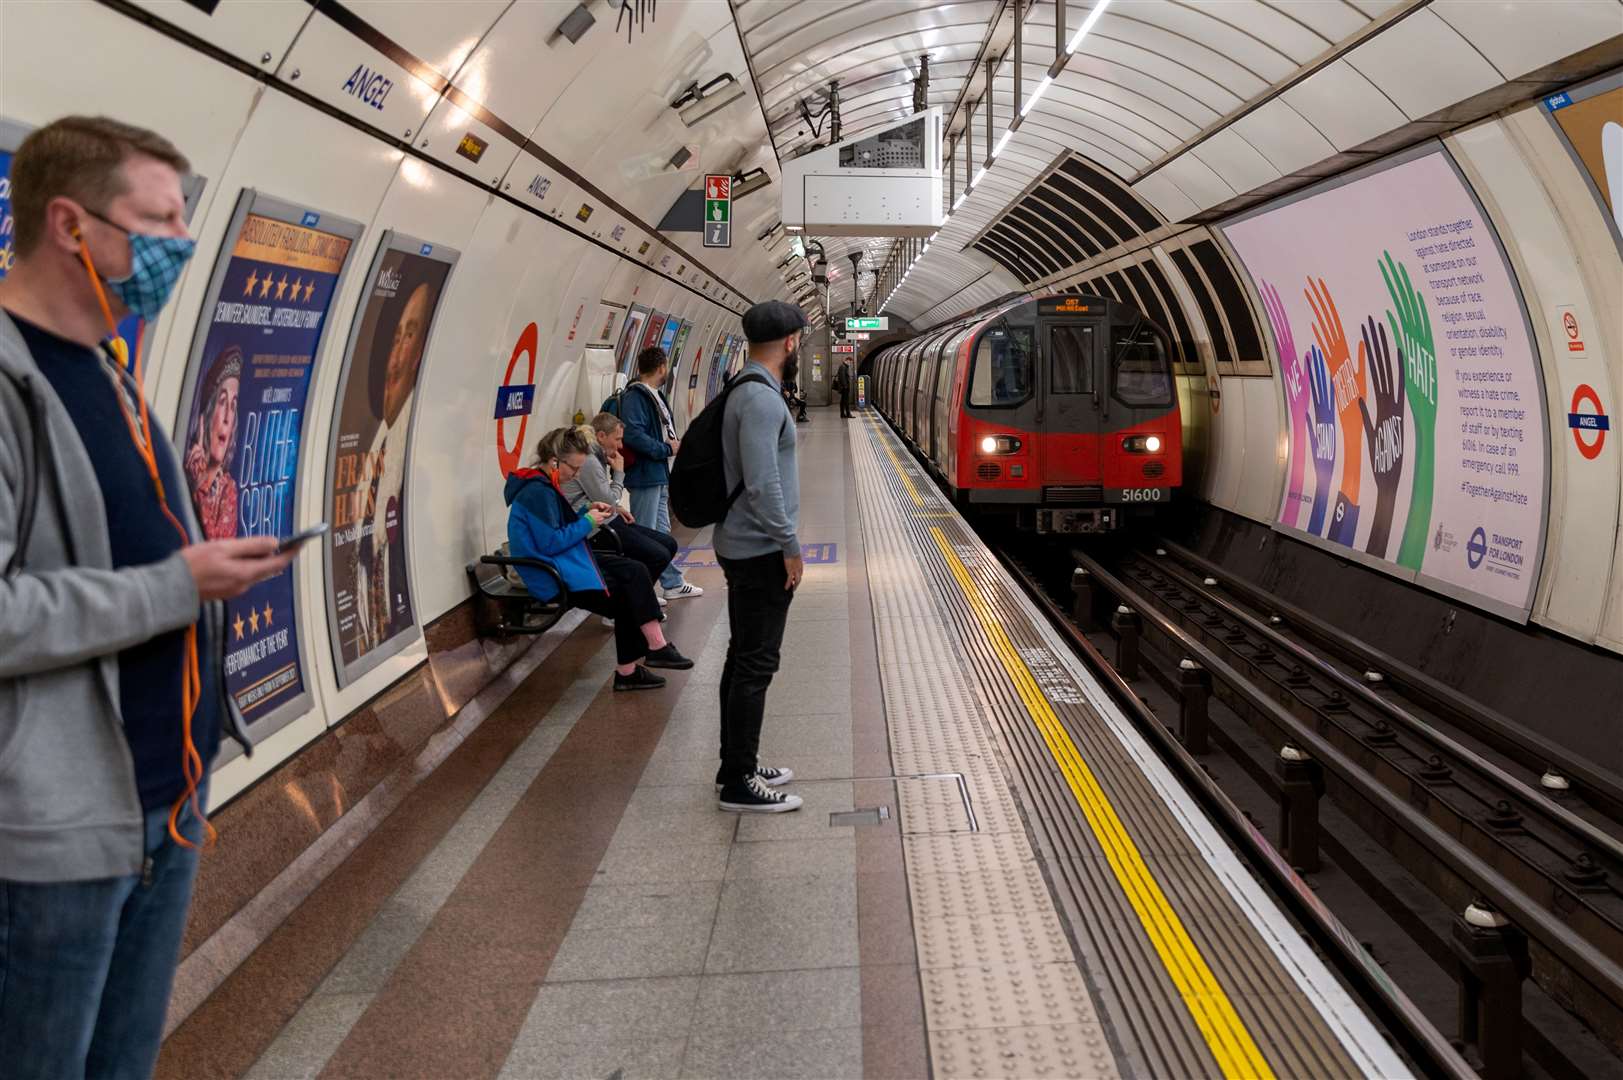 Transport for London says it is watching the situation closely. Image: iStock.